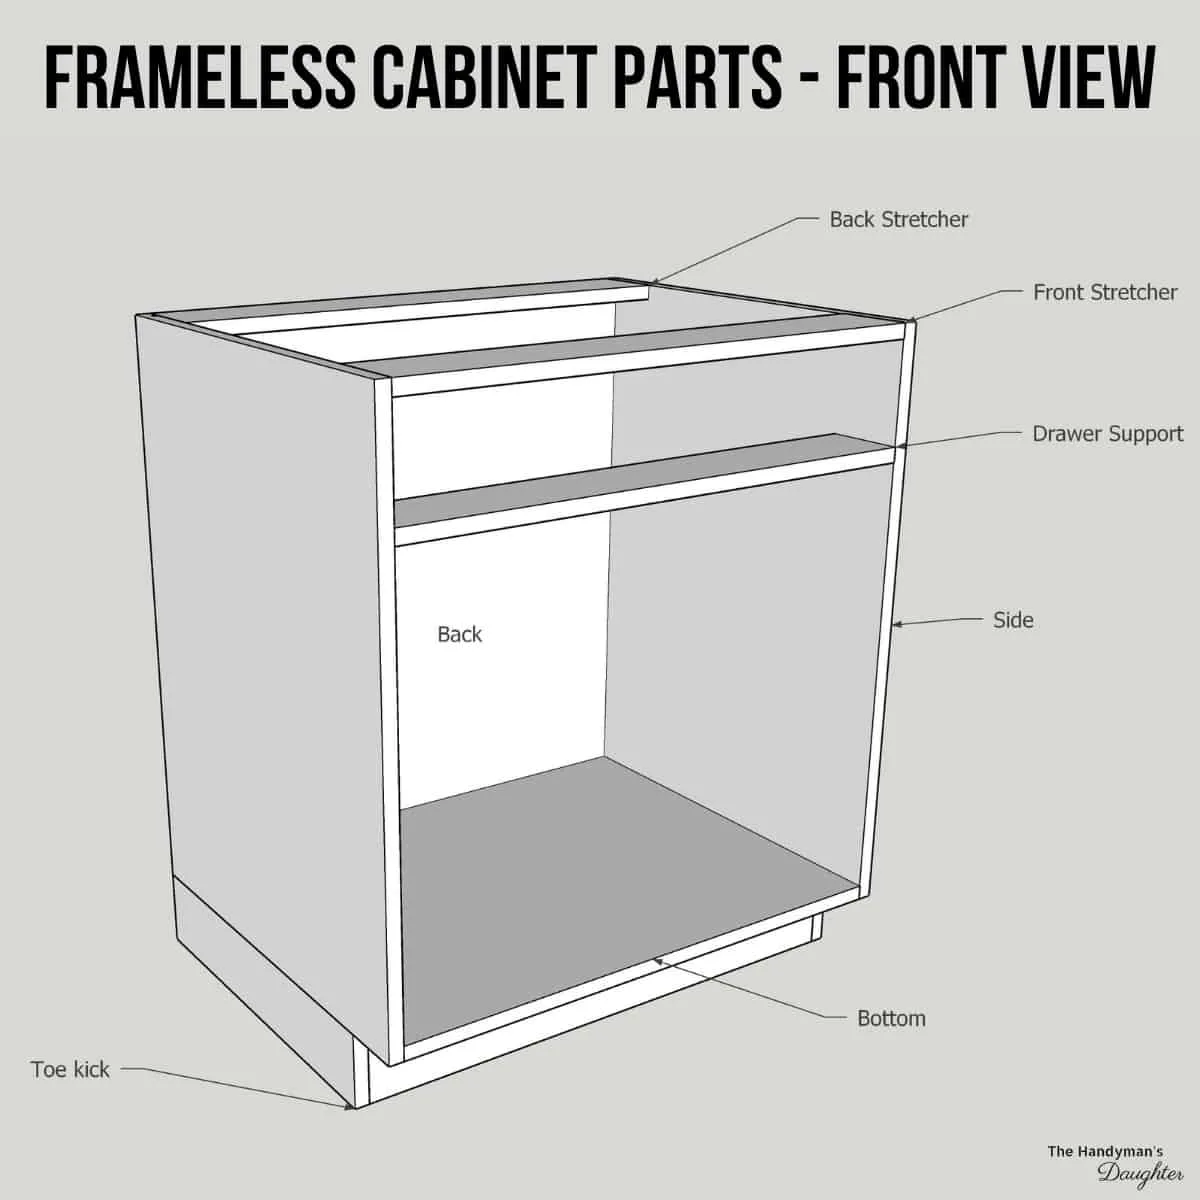 parts of a cabinet (frameless) -  front view